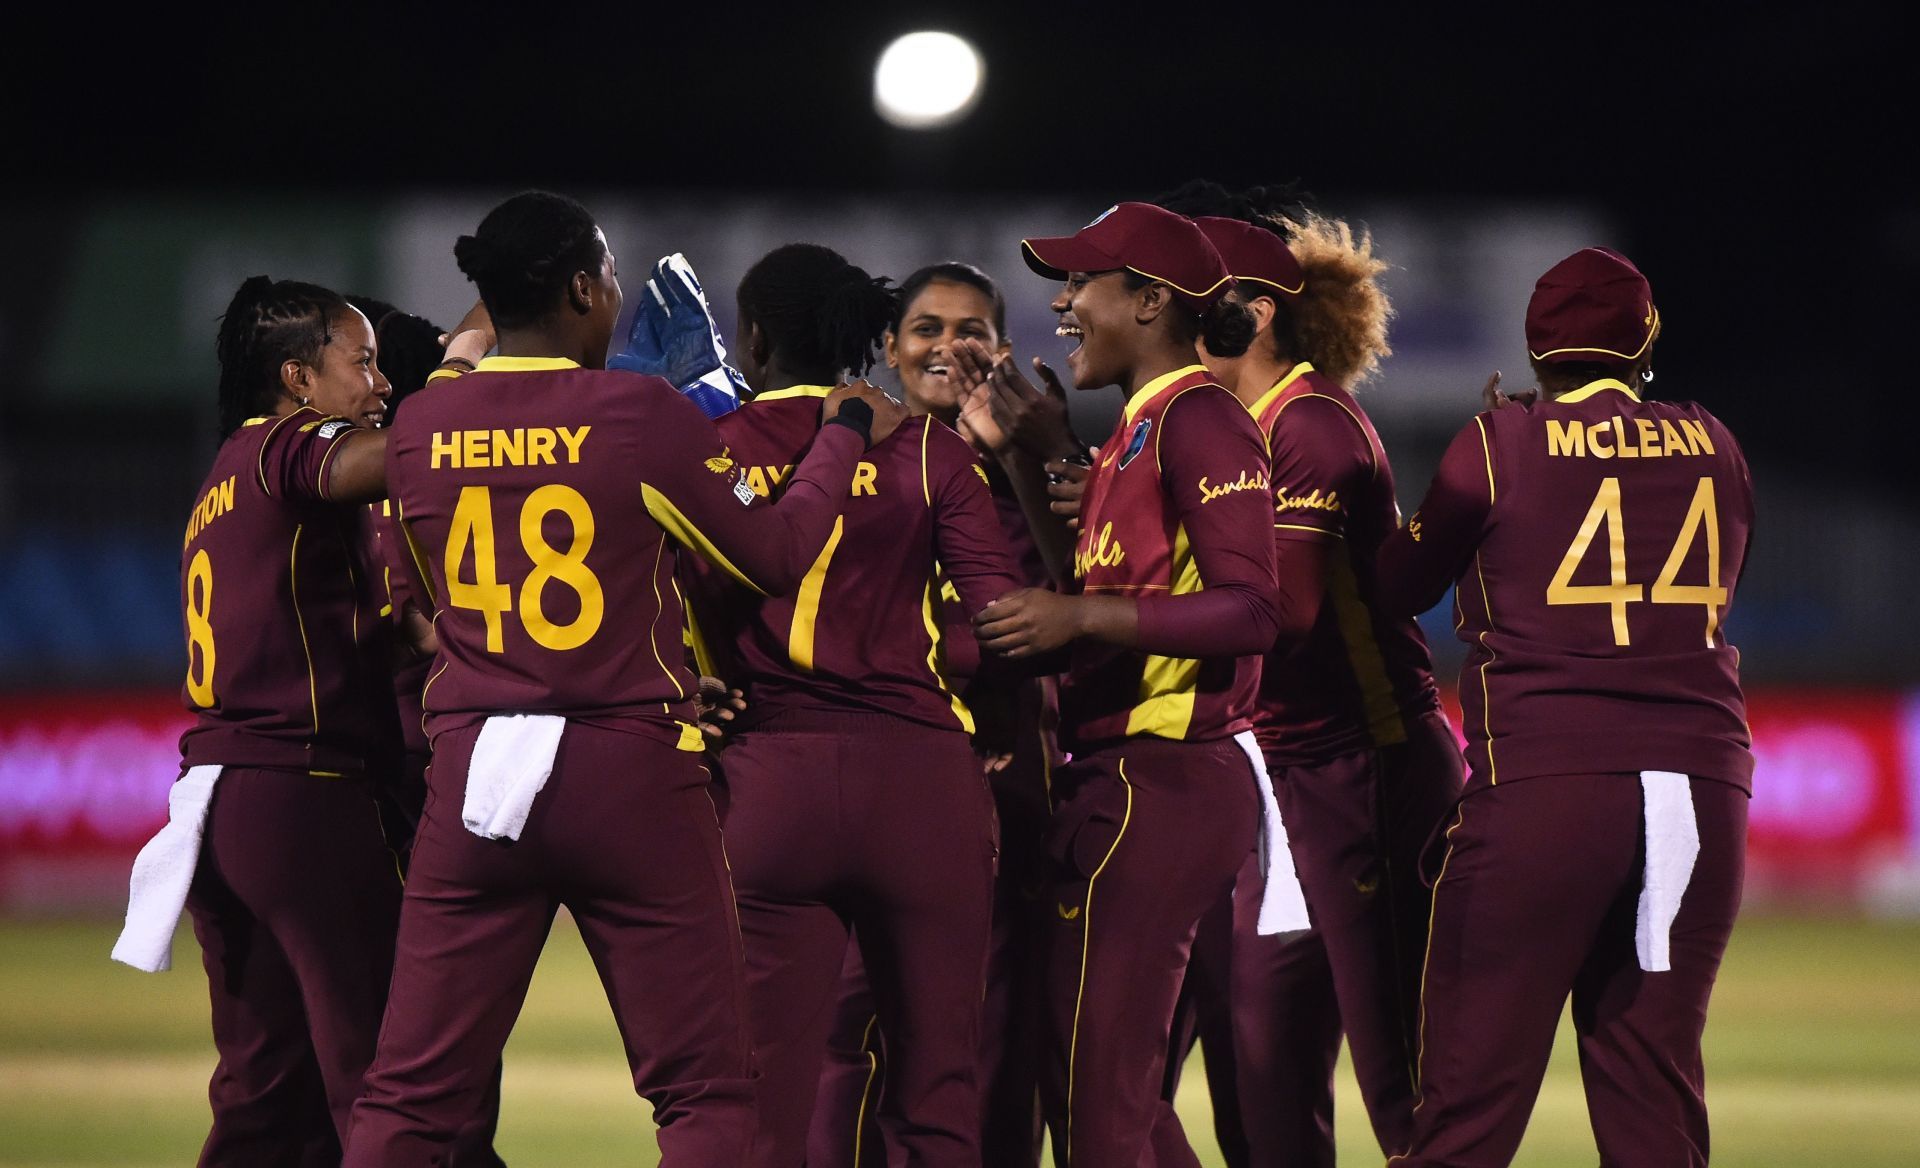 West Indies are considered to be the best side in this tournament